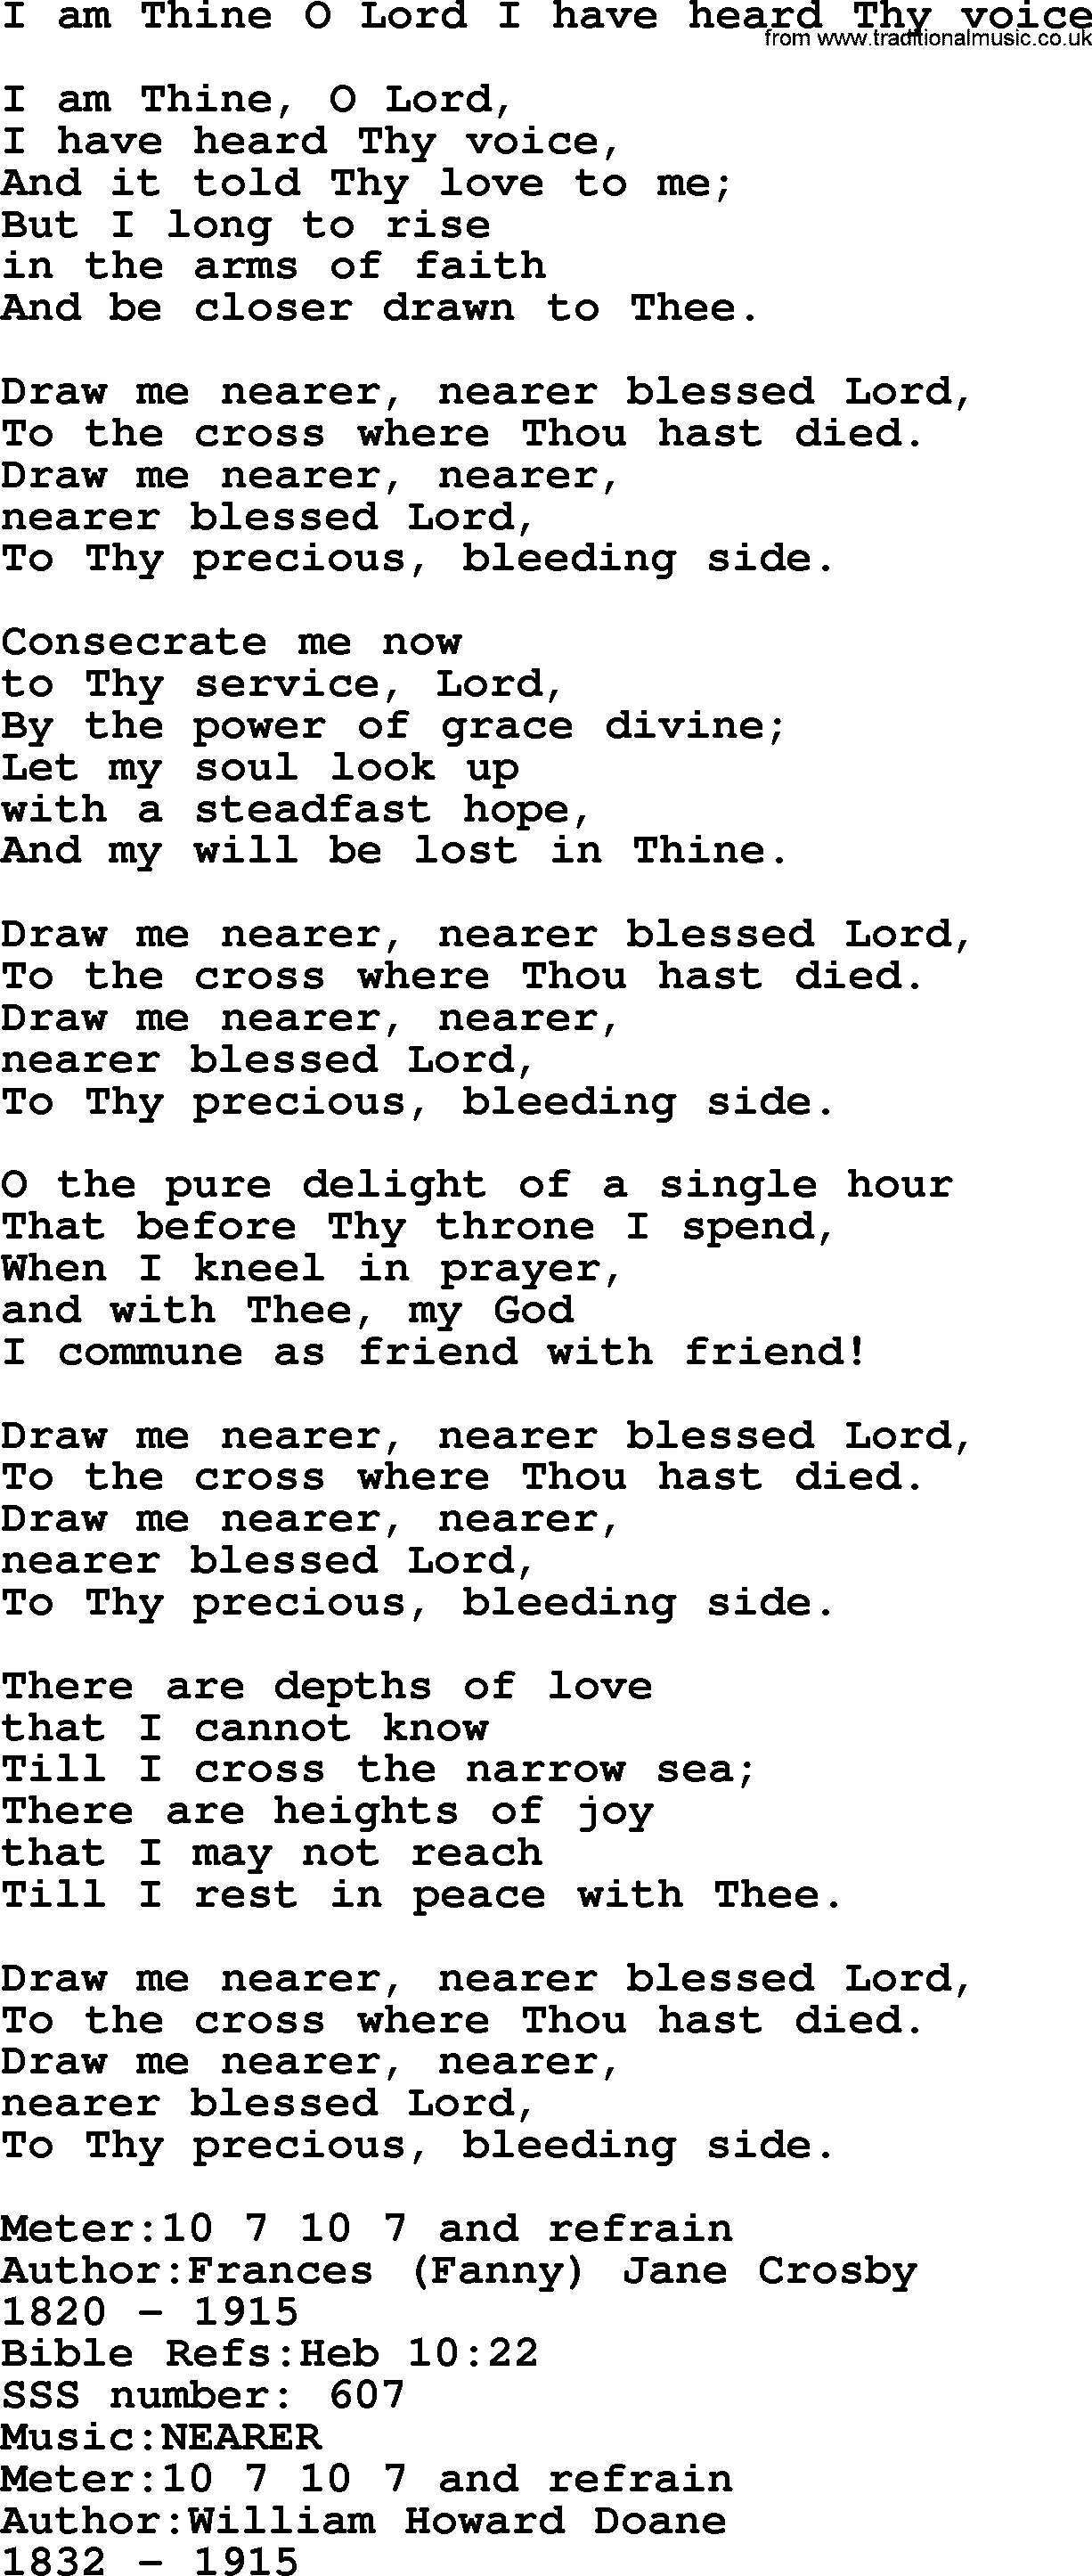 Sacred Songs and Solos complete, 1200 Hymns, title: I Am Thine O Lord I Have Heard Thy Voice, lyrics and PDF